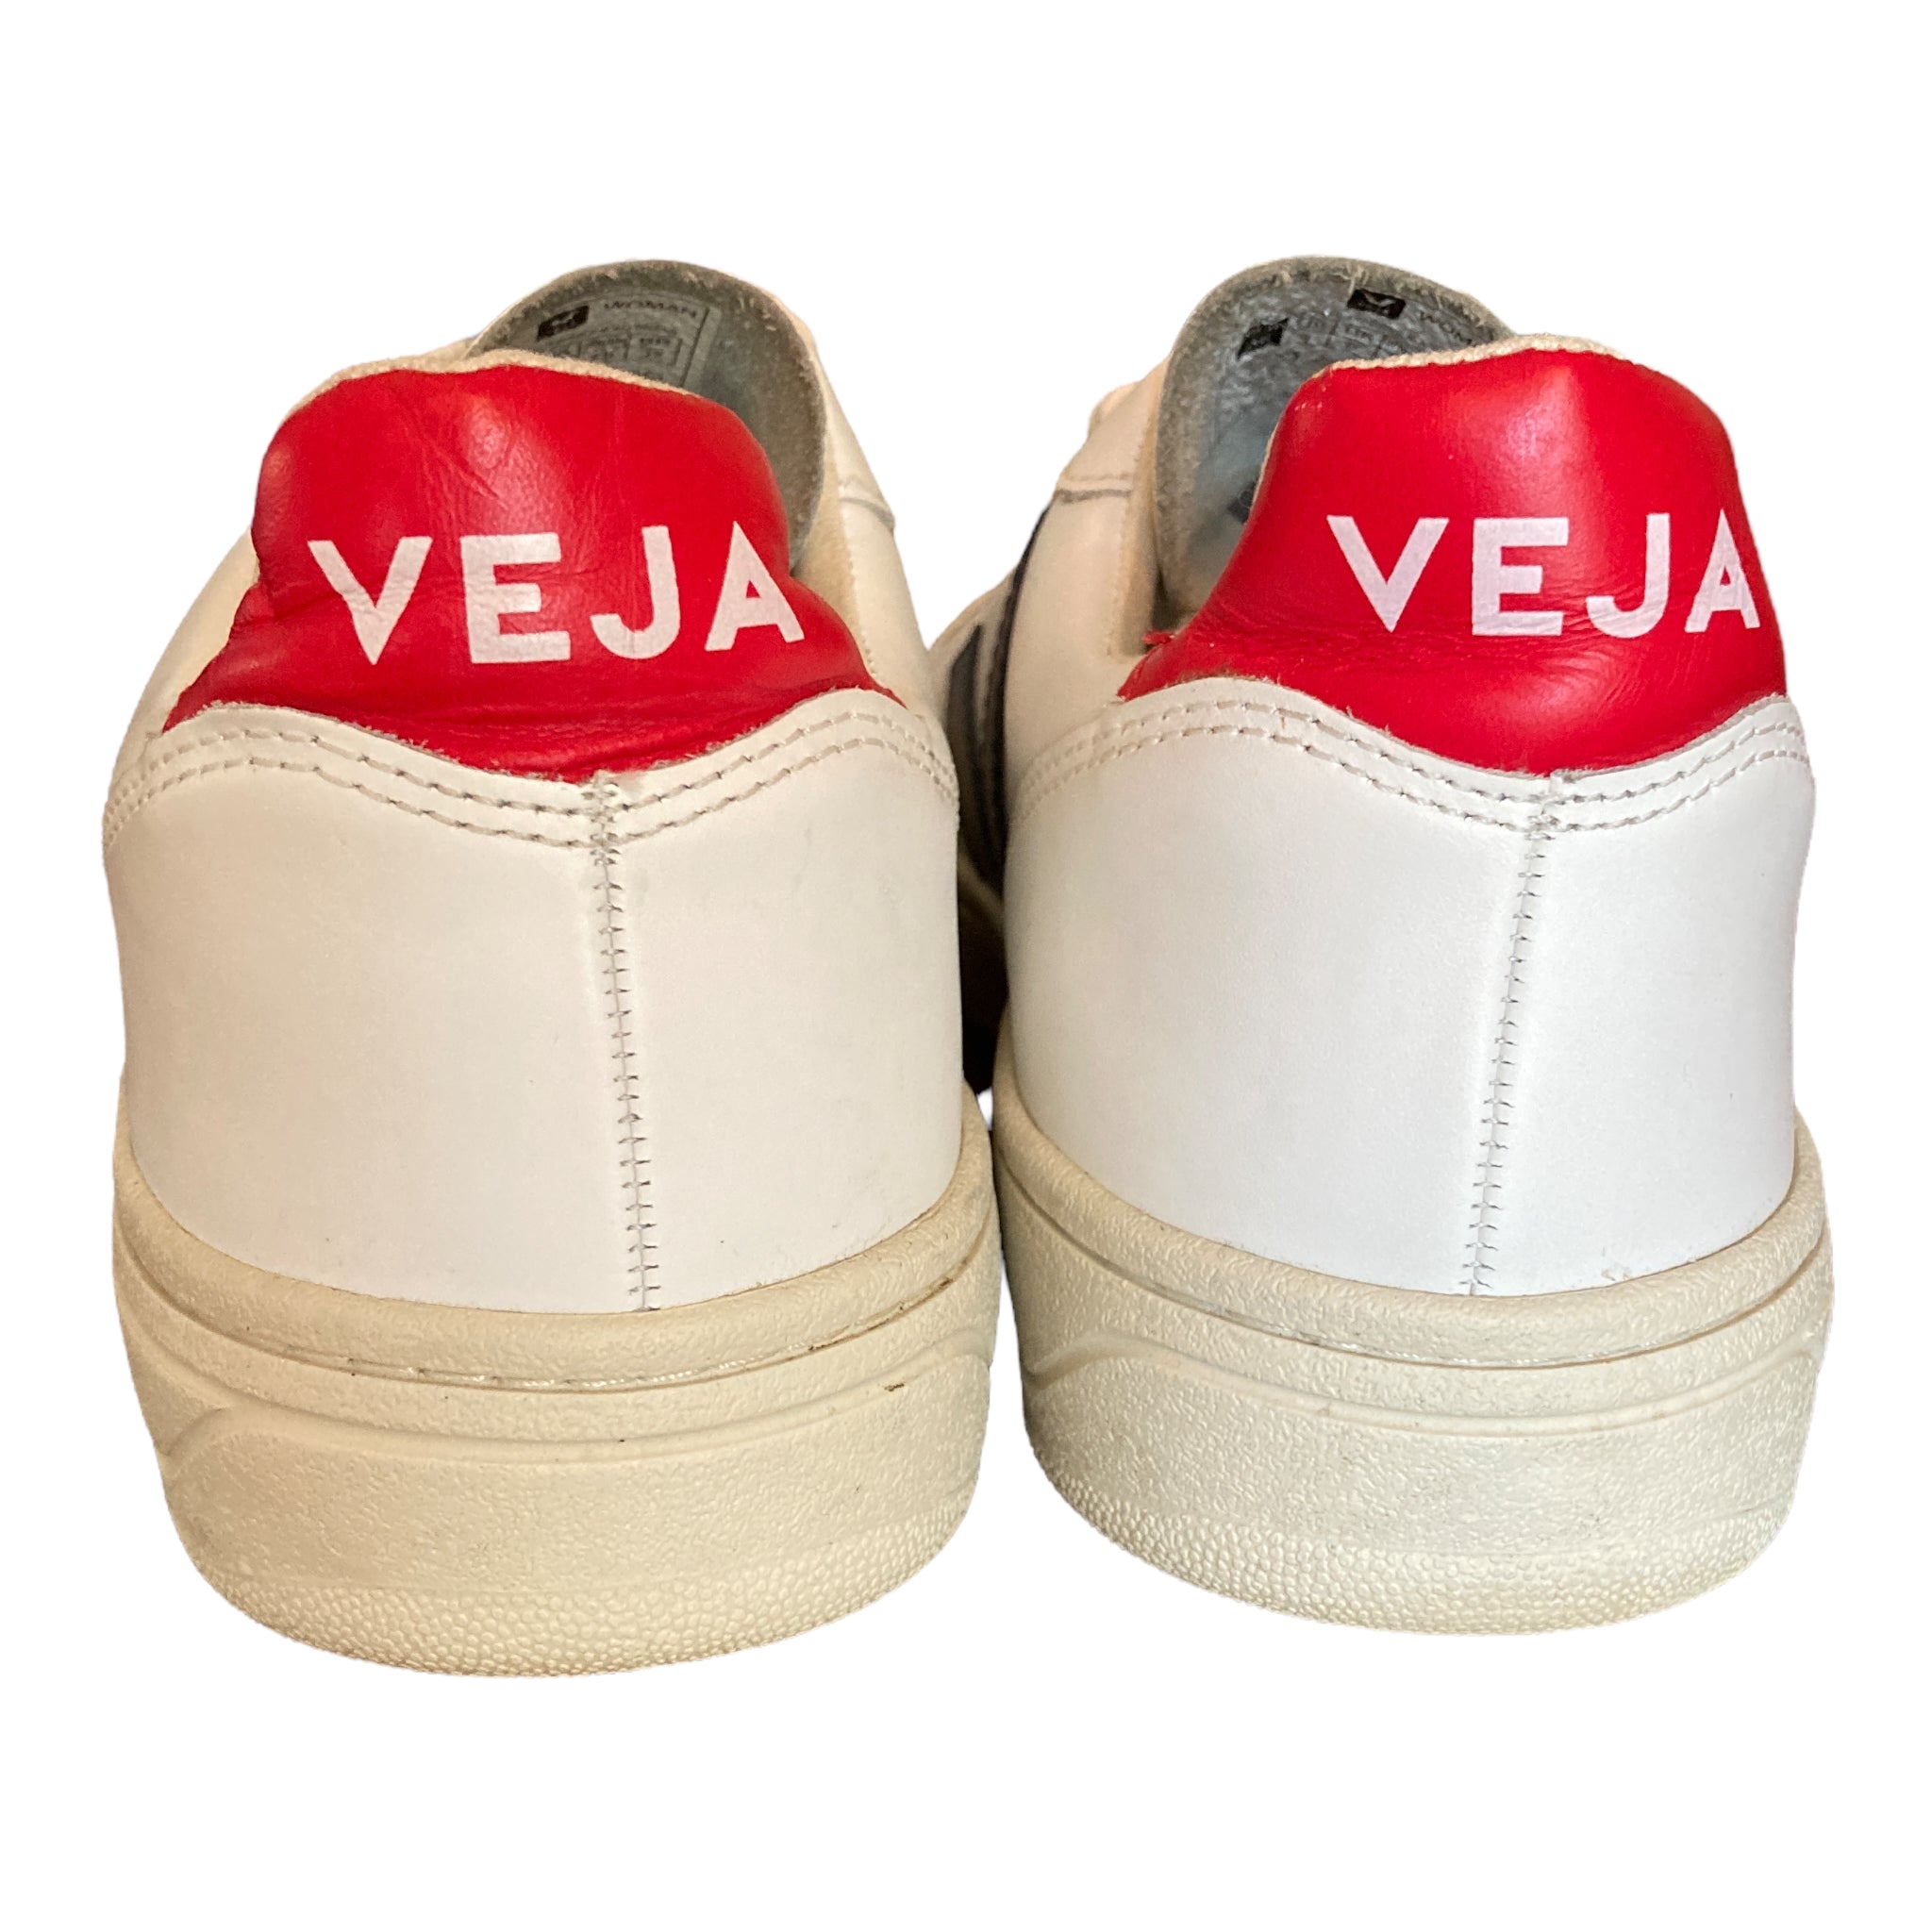 Veja Leather Colorblock Pattern Sneakers, 8